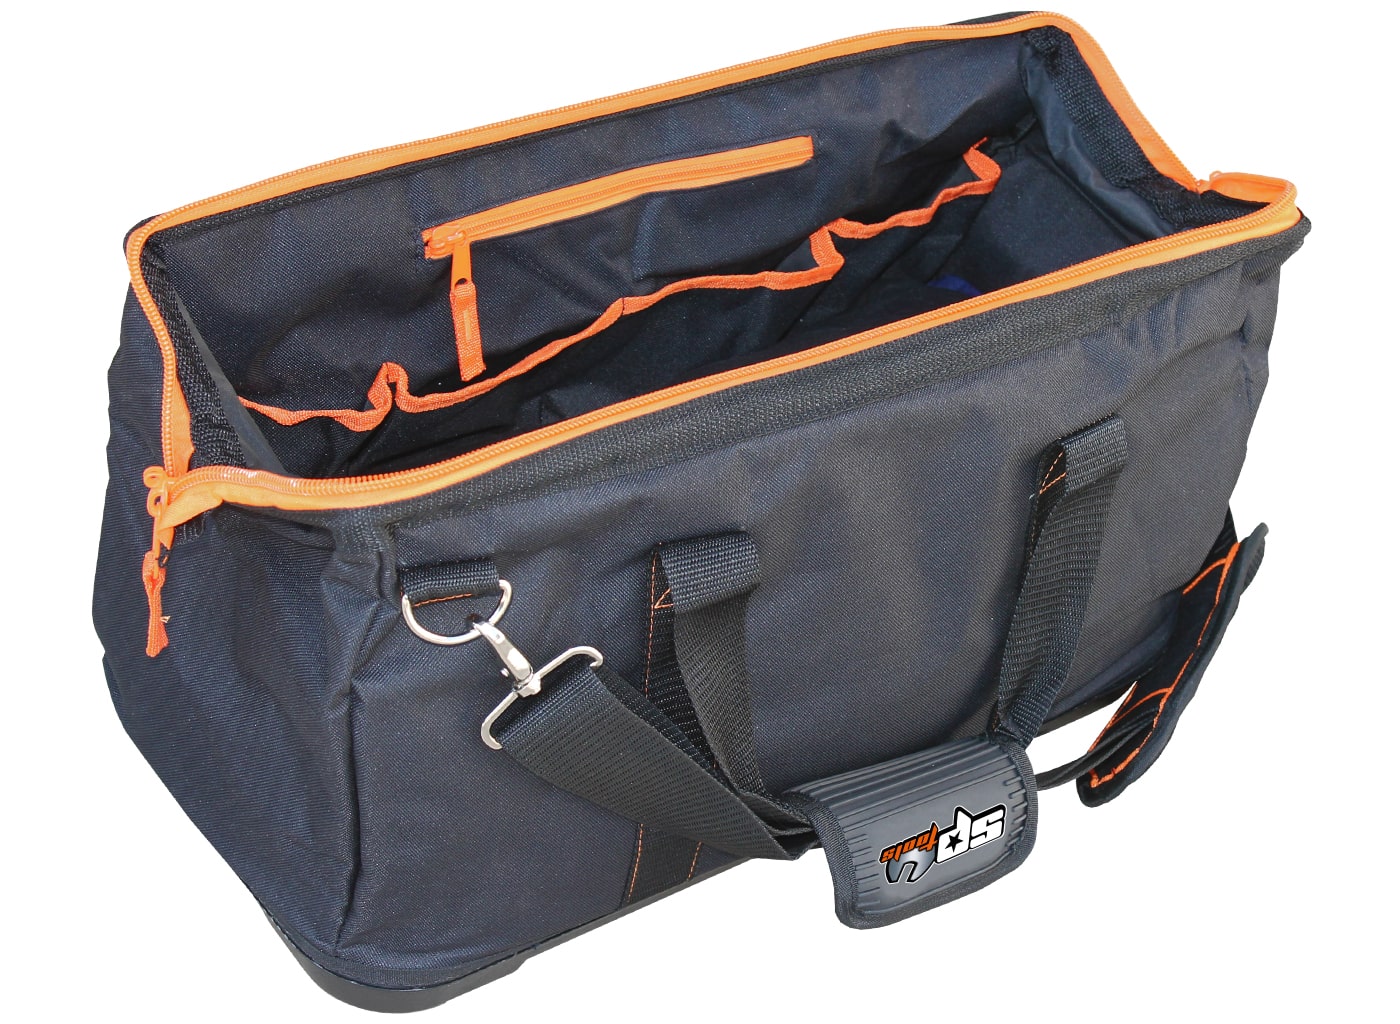 Open Mouth Tool Bag - SP40360 by SP Tools